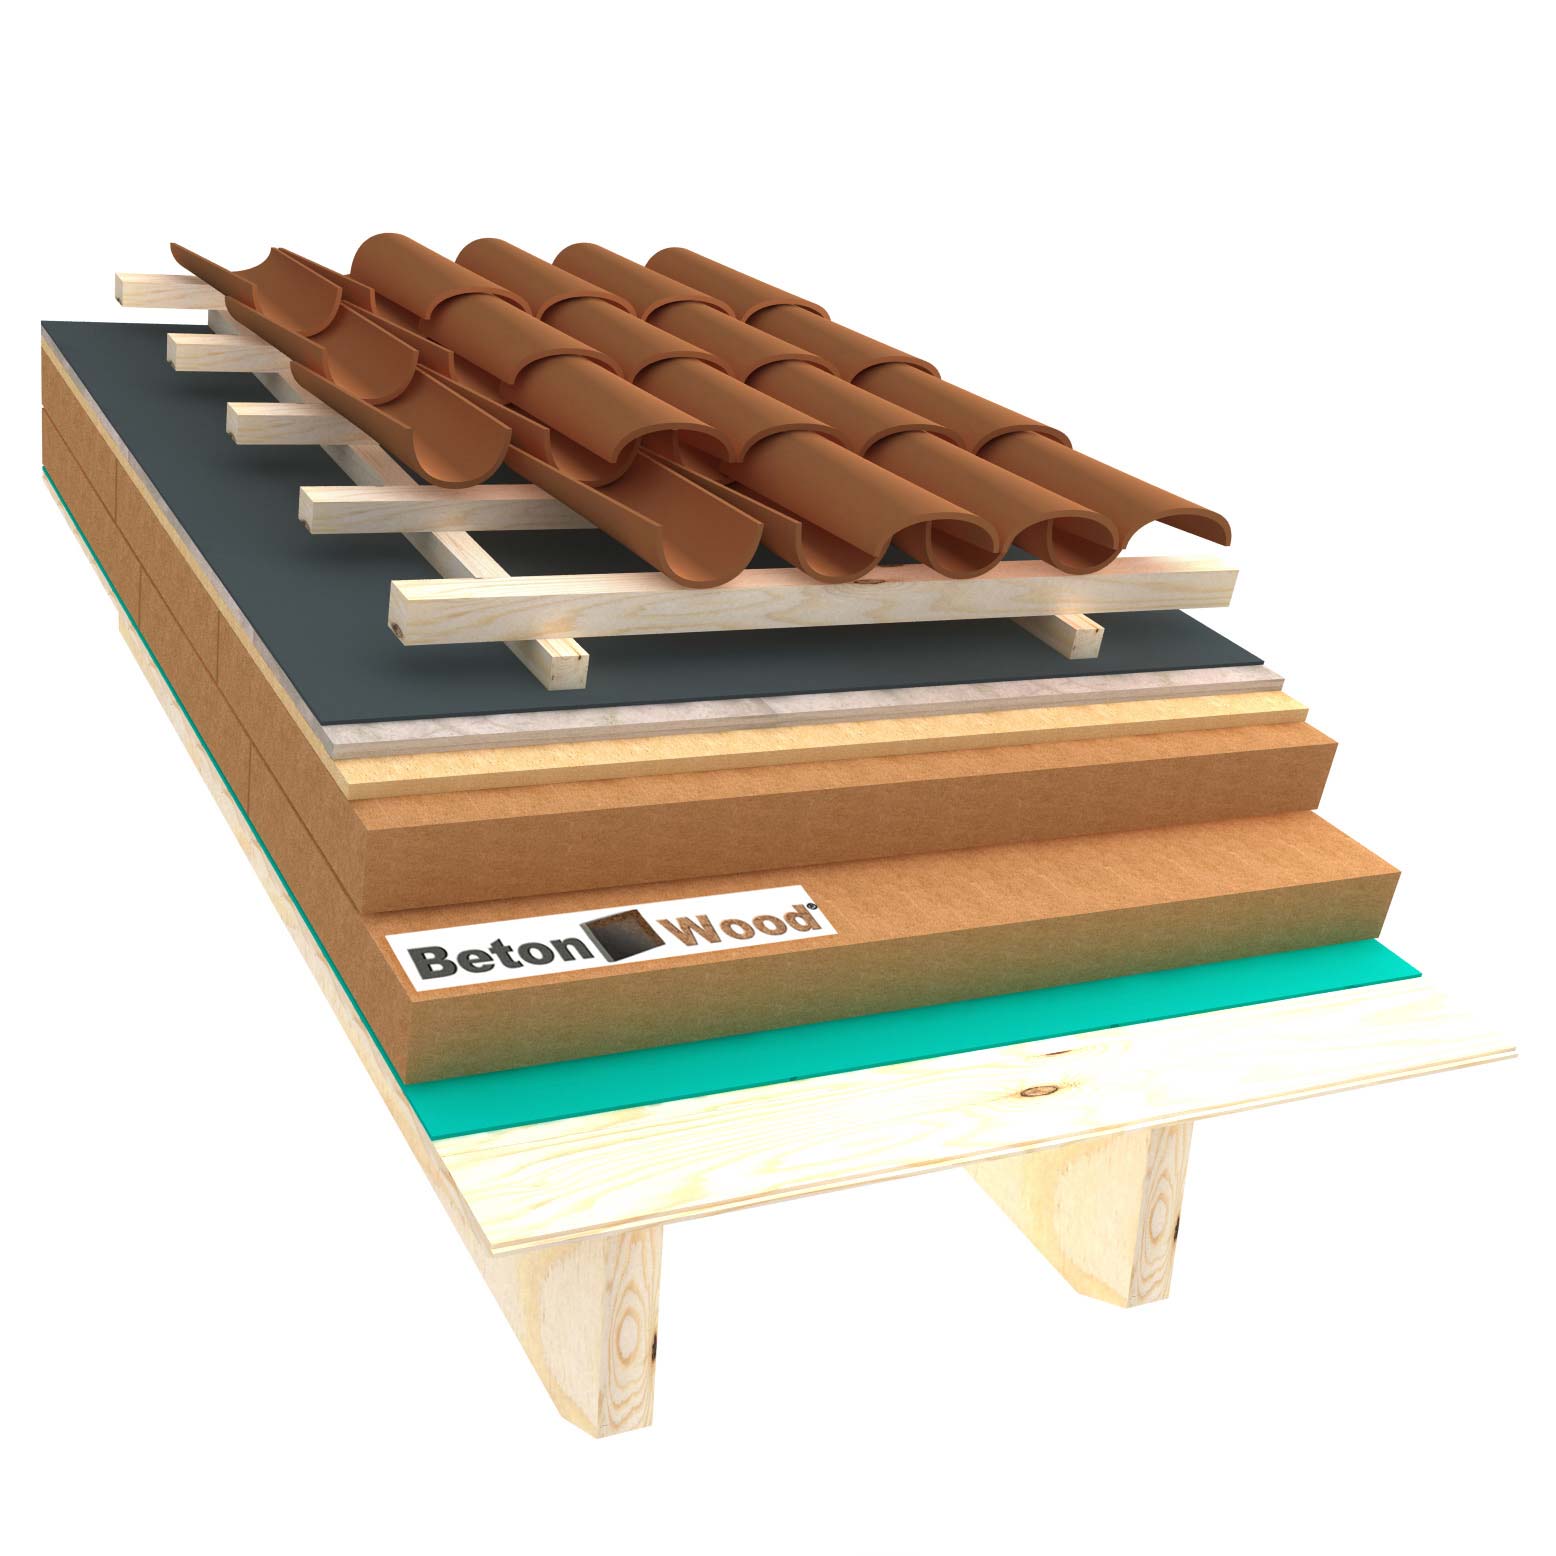 Ventilated roof with wood fiber Isorel, Universal dry and cement bonded particle boards on matchboarding